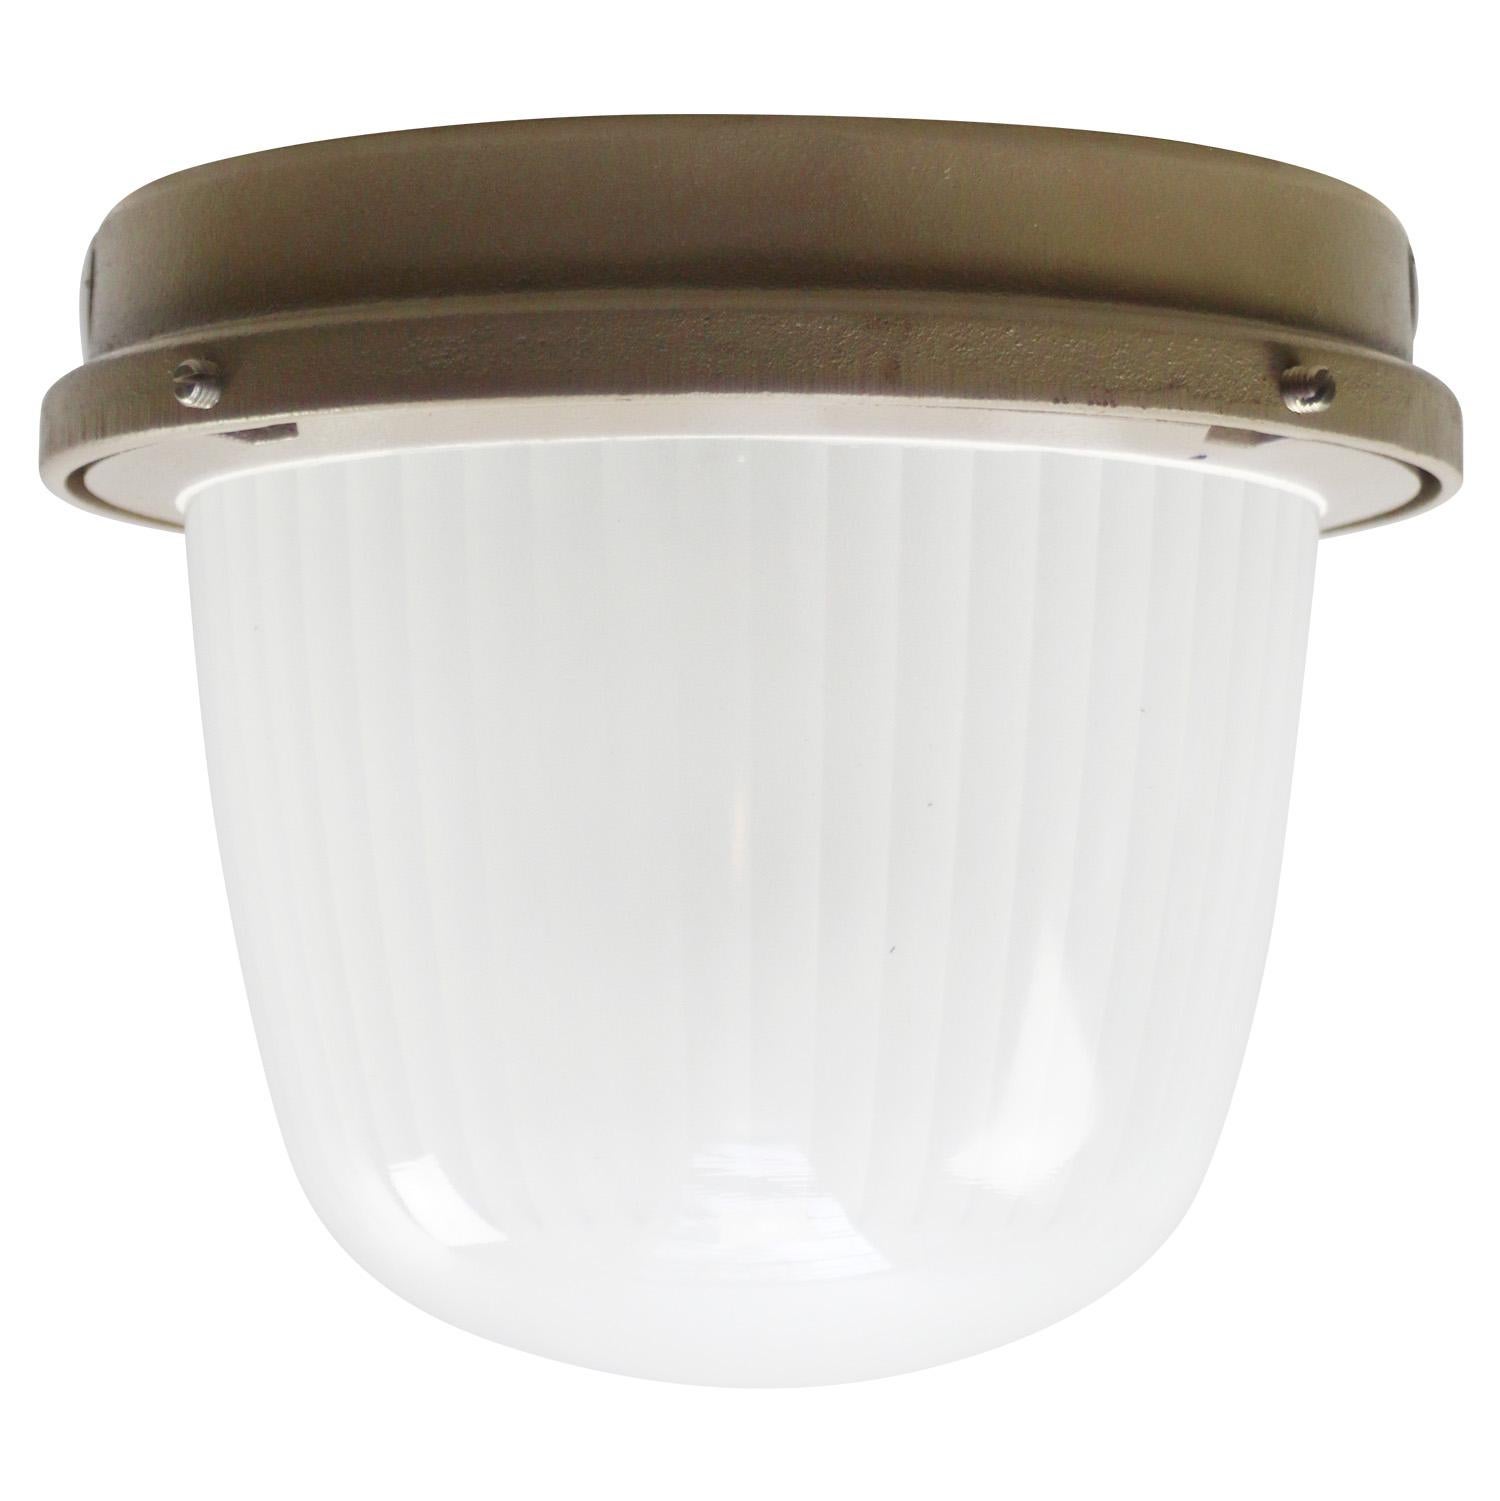 French Industrial wall / ceiling lamp by Holophane, France, model CE200
Beige cast iron with frosted cut glass.

Weight : 5.30 kg / 11.7 lb

Priced per individual item. All lamps have been made suitable by international standards for incandescent